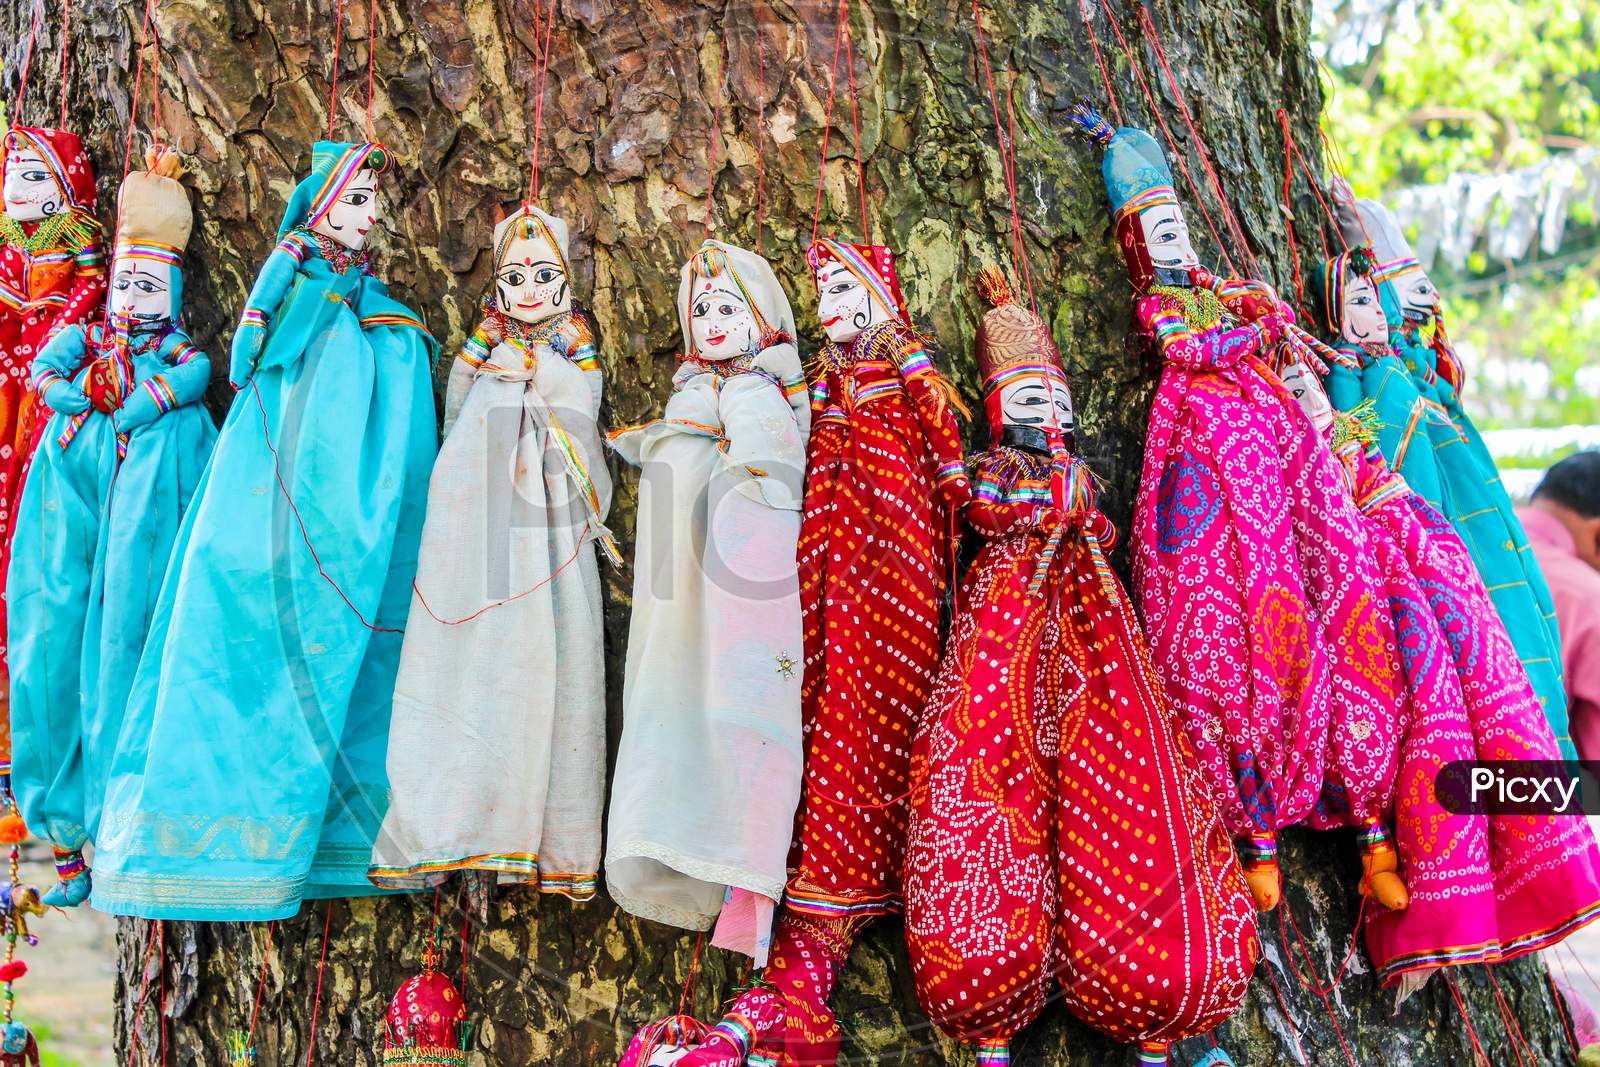 A Bunch of colorful puppet dolls in Kochi/Kerala/India.